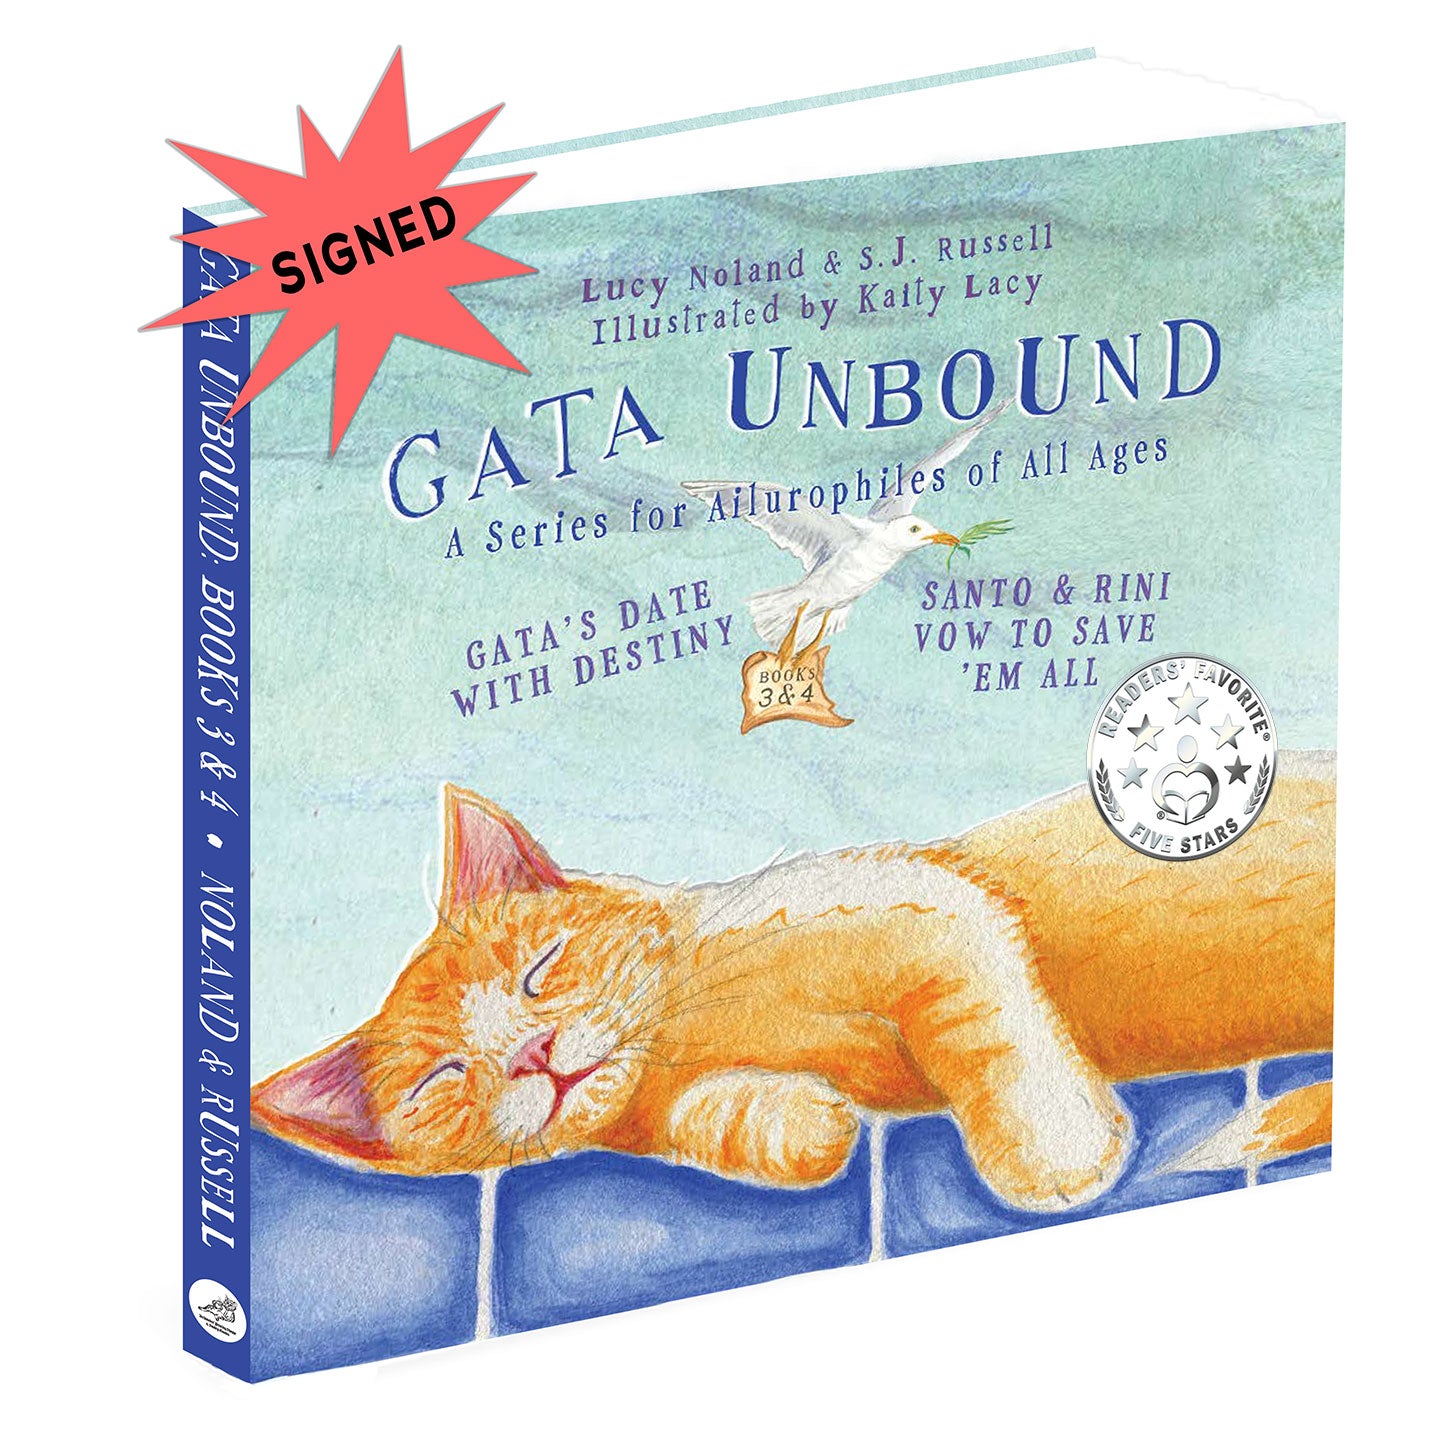 Signed Gata Unbound: Gata's Date with Destiny and Santo & Rini Vow to Save 'em All